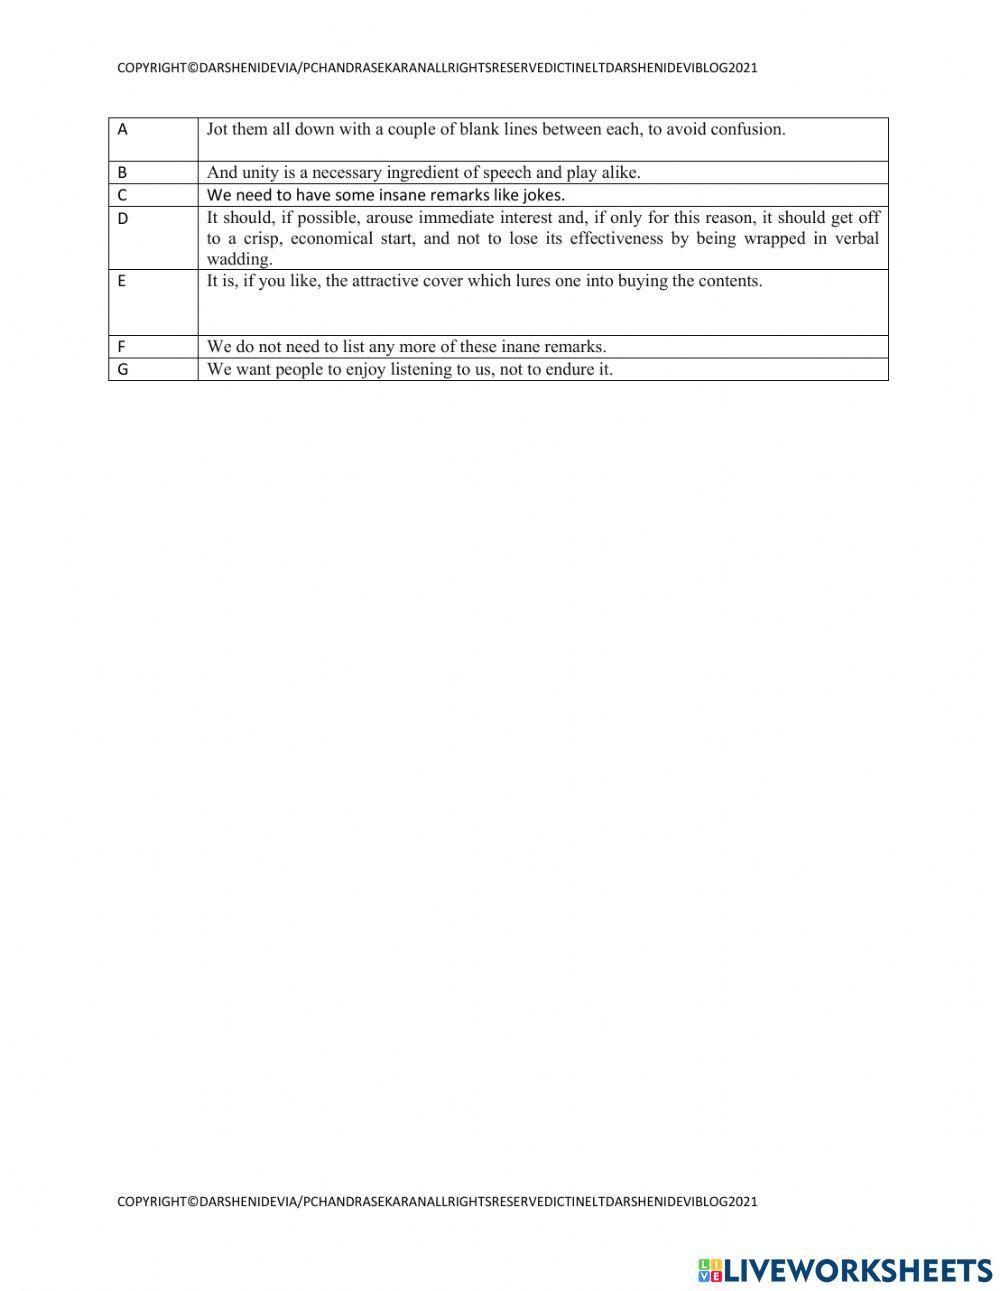 Muet cefr reading paper part 4 and part 5 worksheets